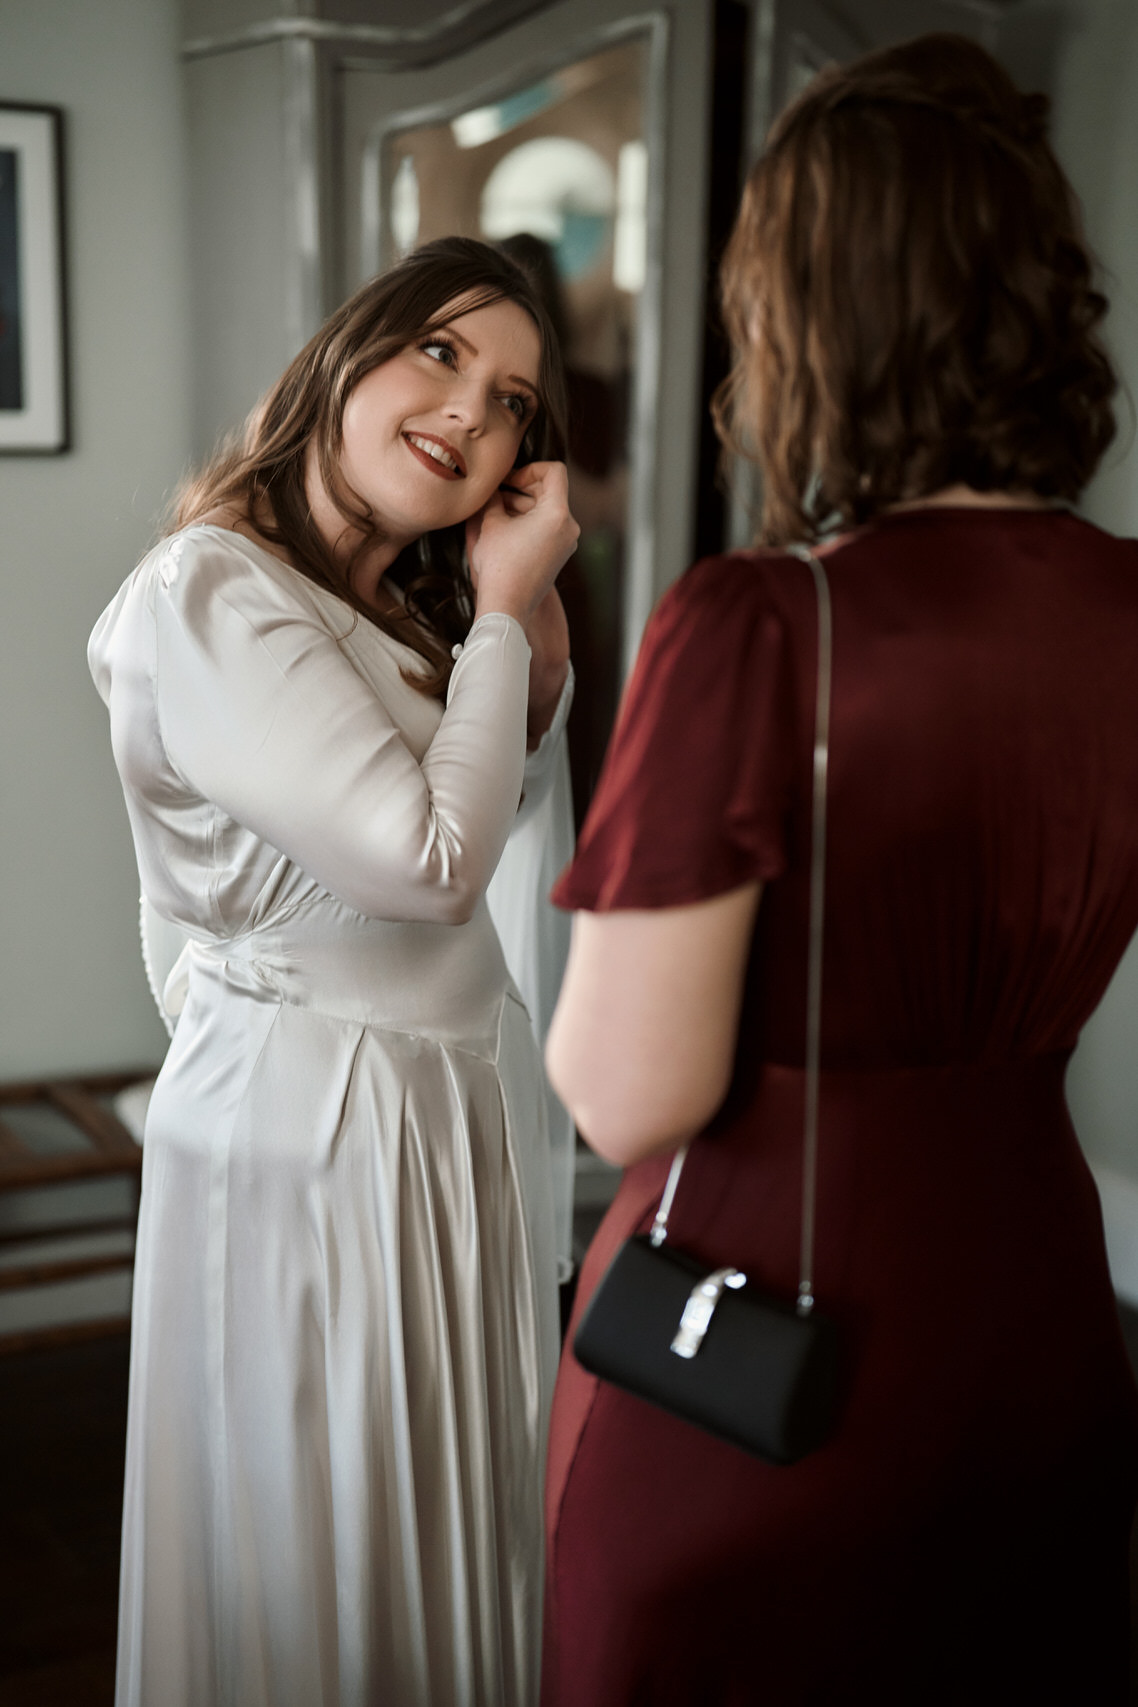 A lady in a white dress is looking at another lady in the mirror.